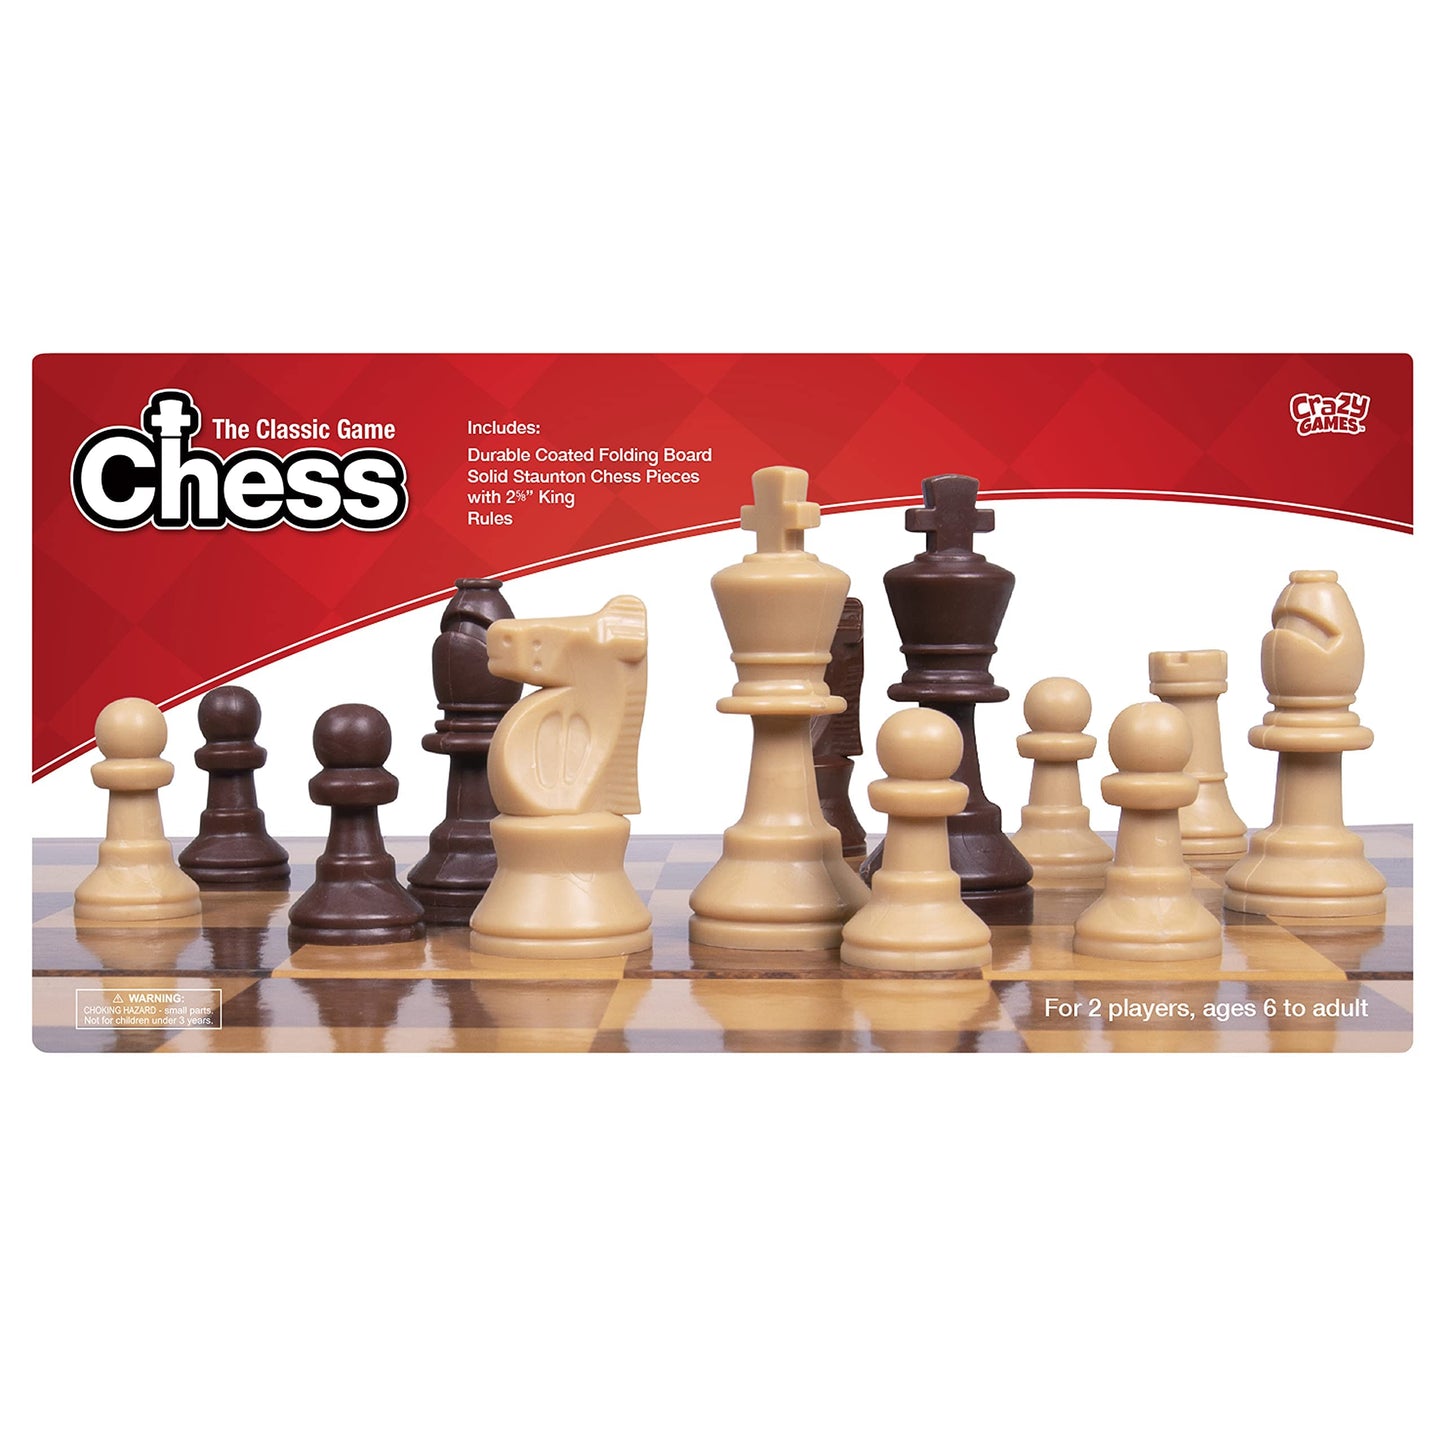 Crazy Games Plastic Chess Set: Premium Quality, Foldable Board with Staunton Pieces - Perfect for Travel, Kids and Adults, Suitable for Indoor & Outdoor